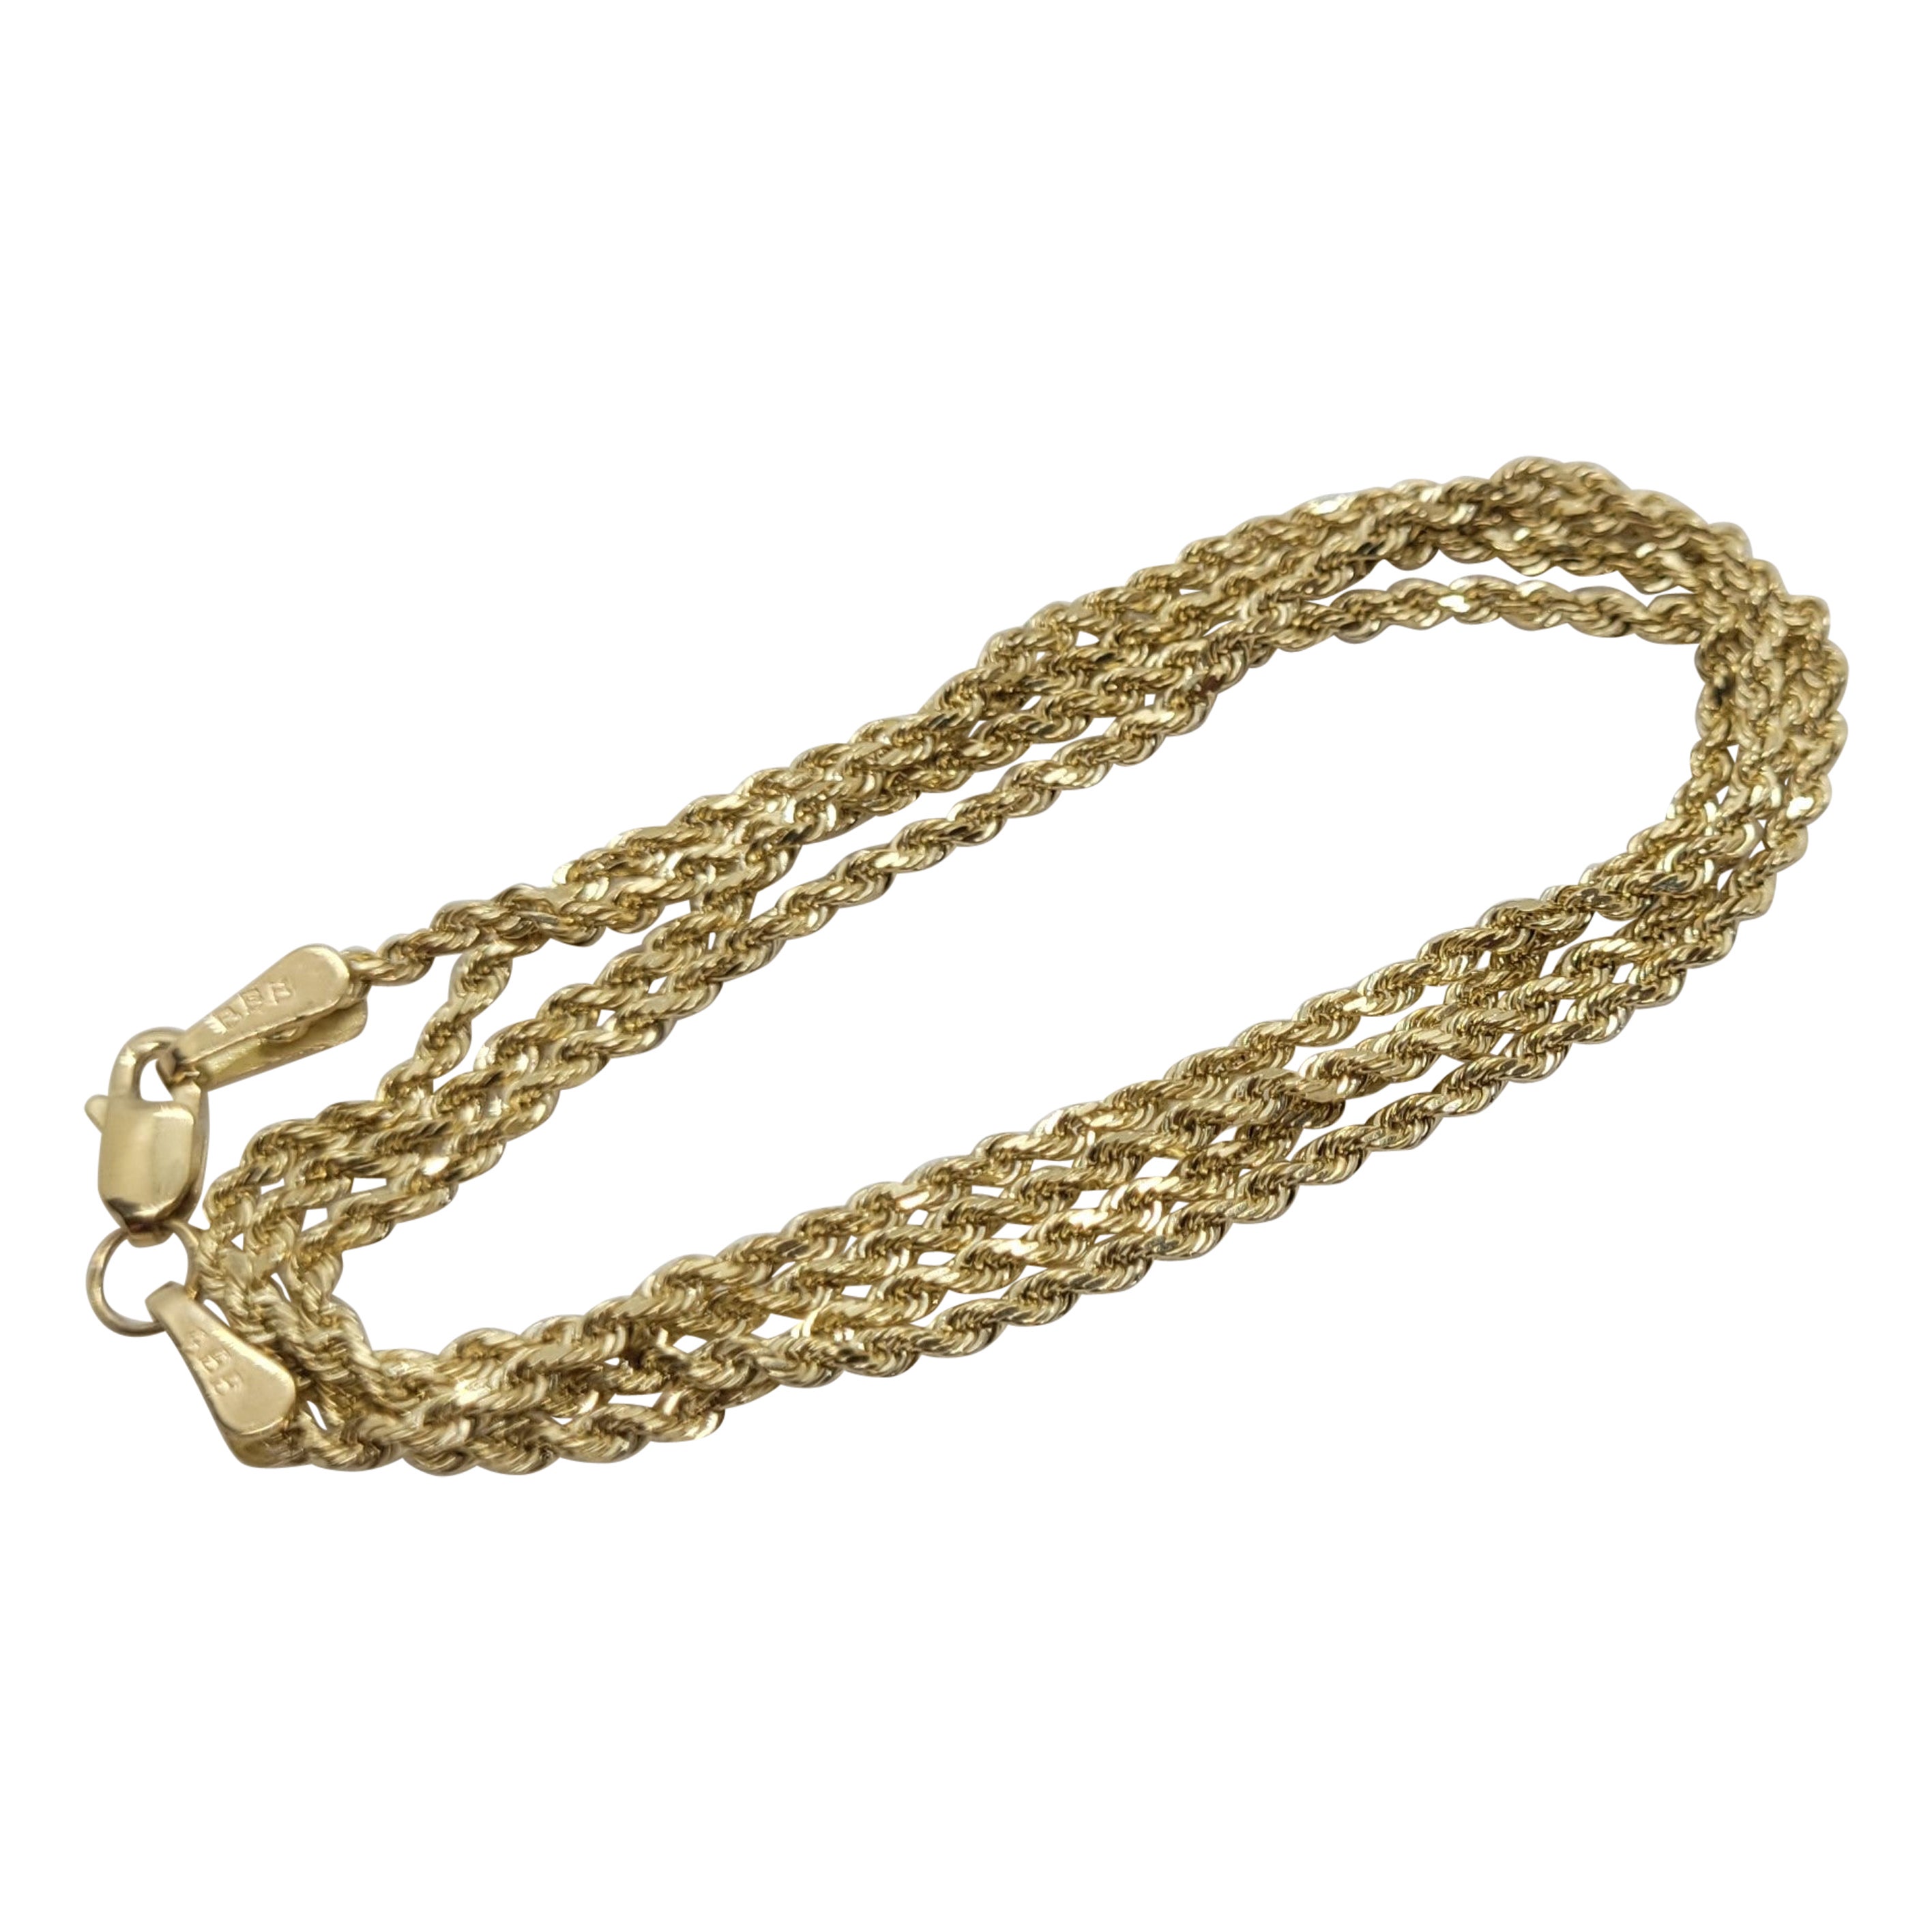 14kt Gold Rope Chain, 20 Inch Length, 1.6mm, 4.8 Grams, Bailey Banks Biddle For Sale